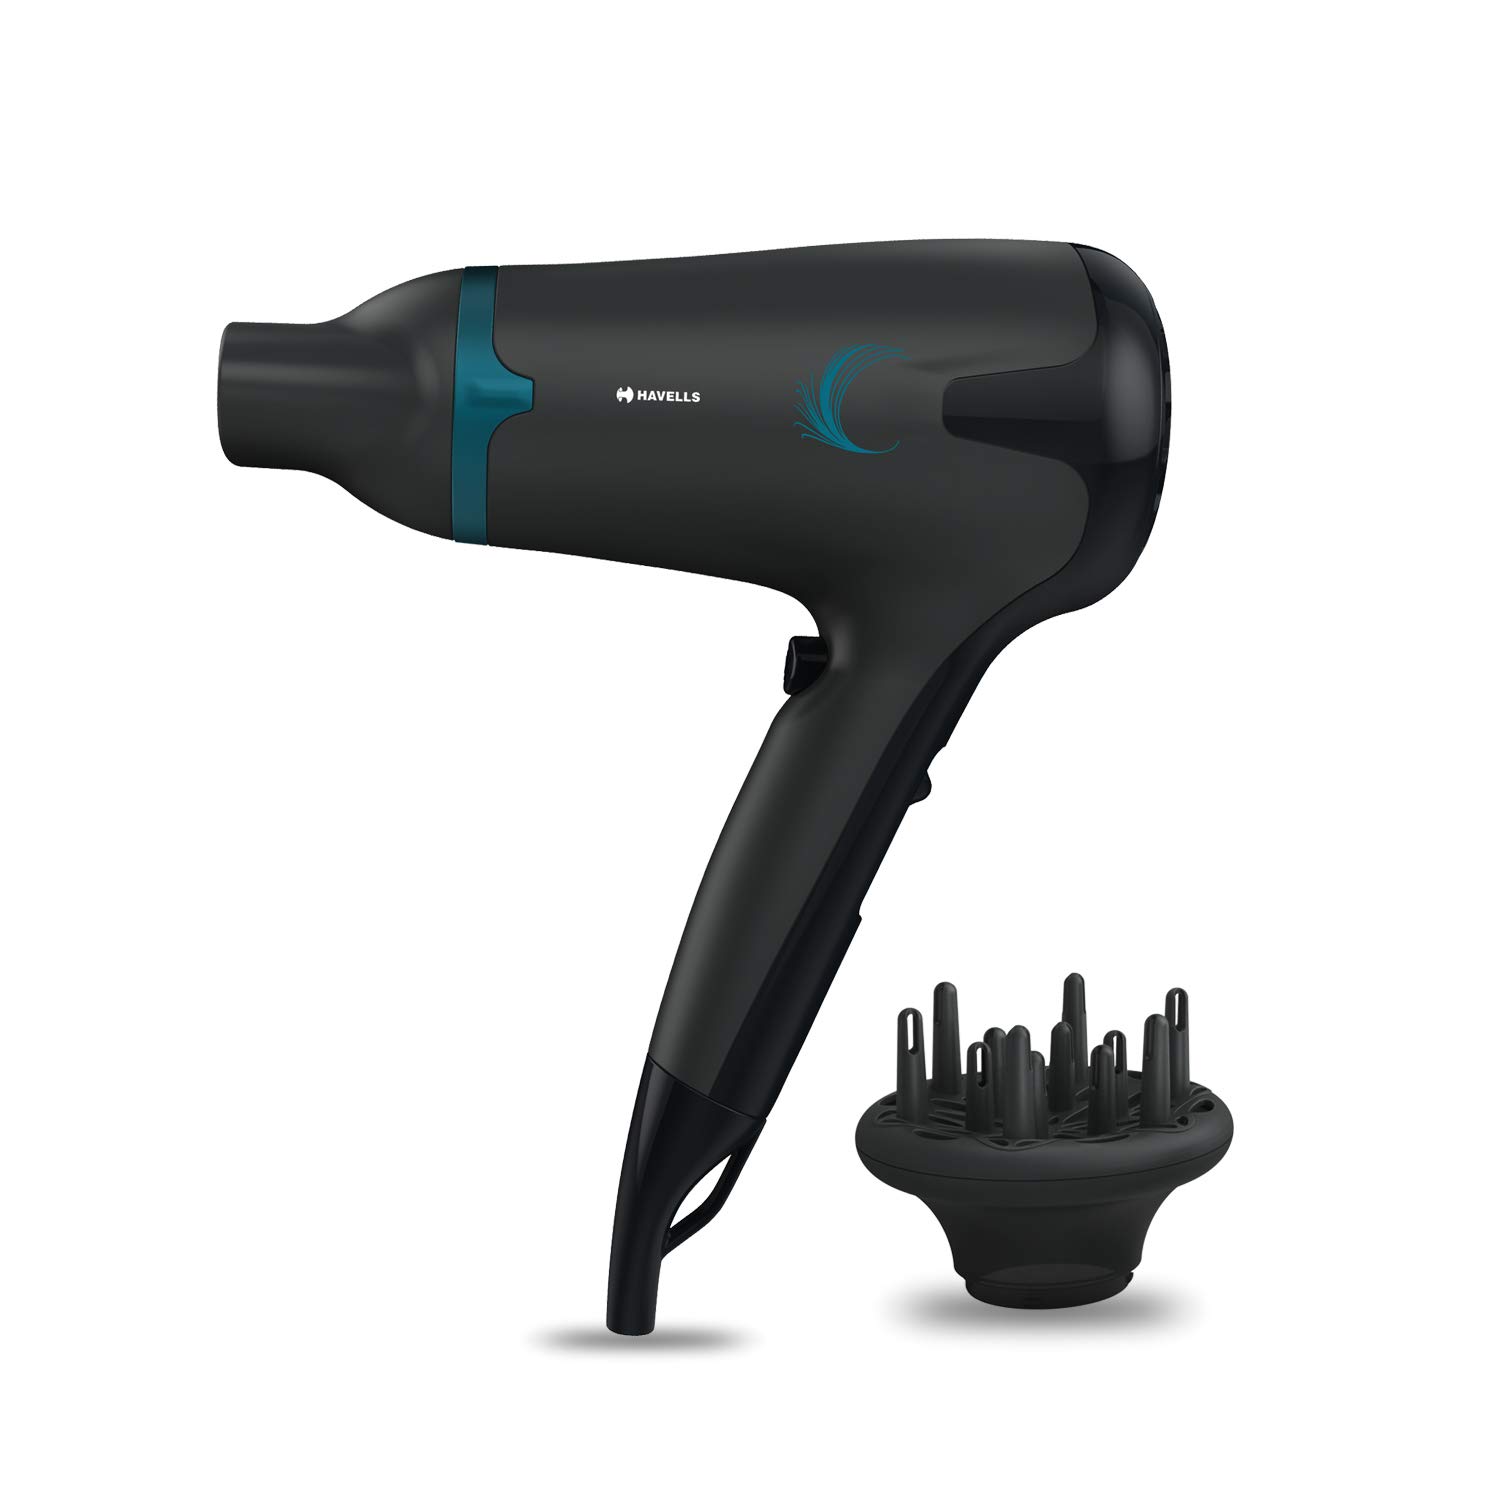 Havells 1700W 2-in-1 Hair Dryer with Diffuser and Thin Concentrator | 2 Heat Settings (Hot/ Warm)